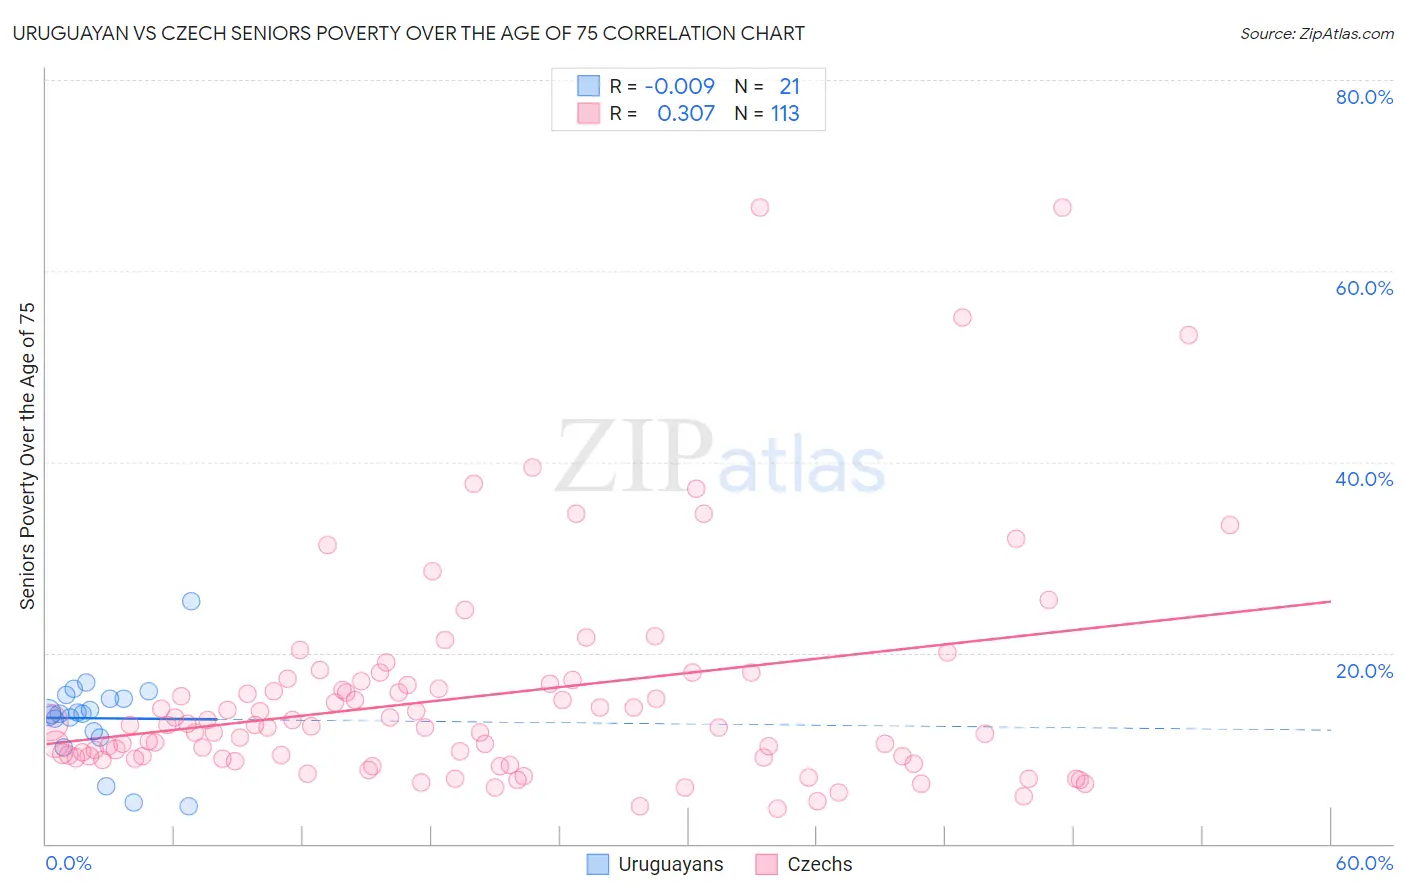 Uruguayan vs Czech Seniors Poverty Over the Age of 75